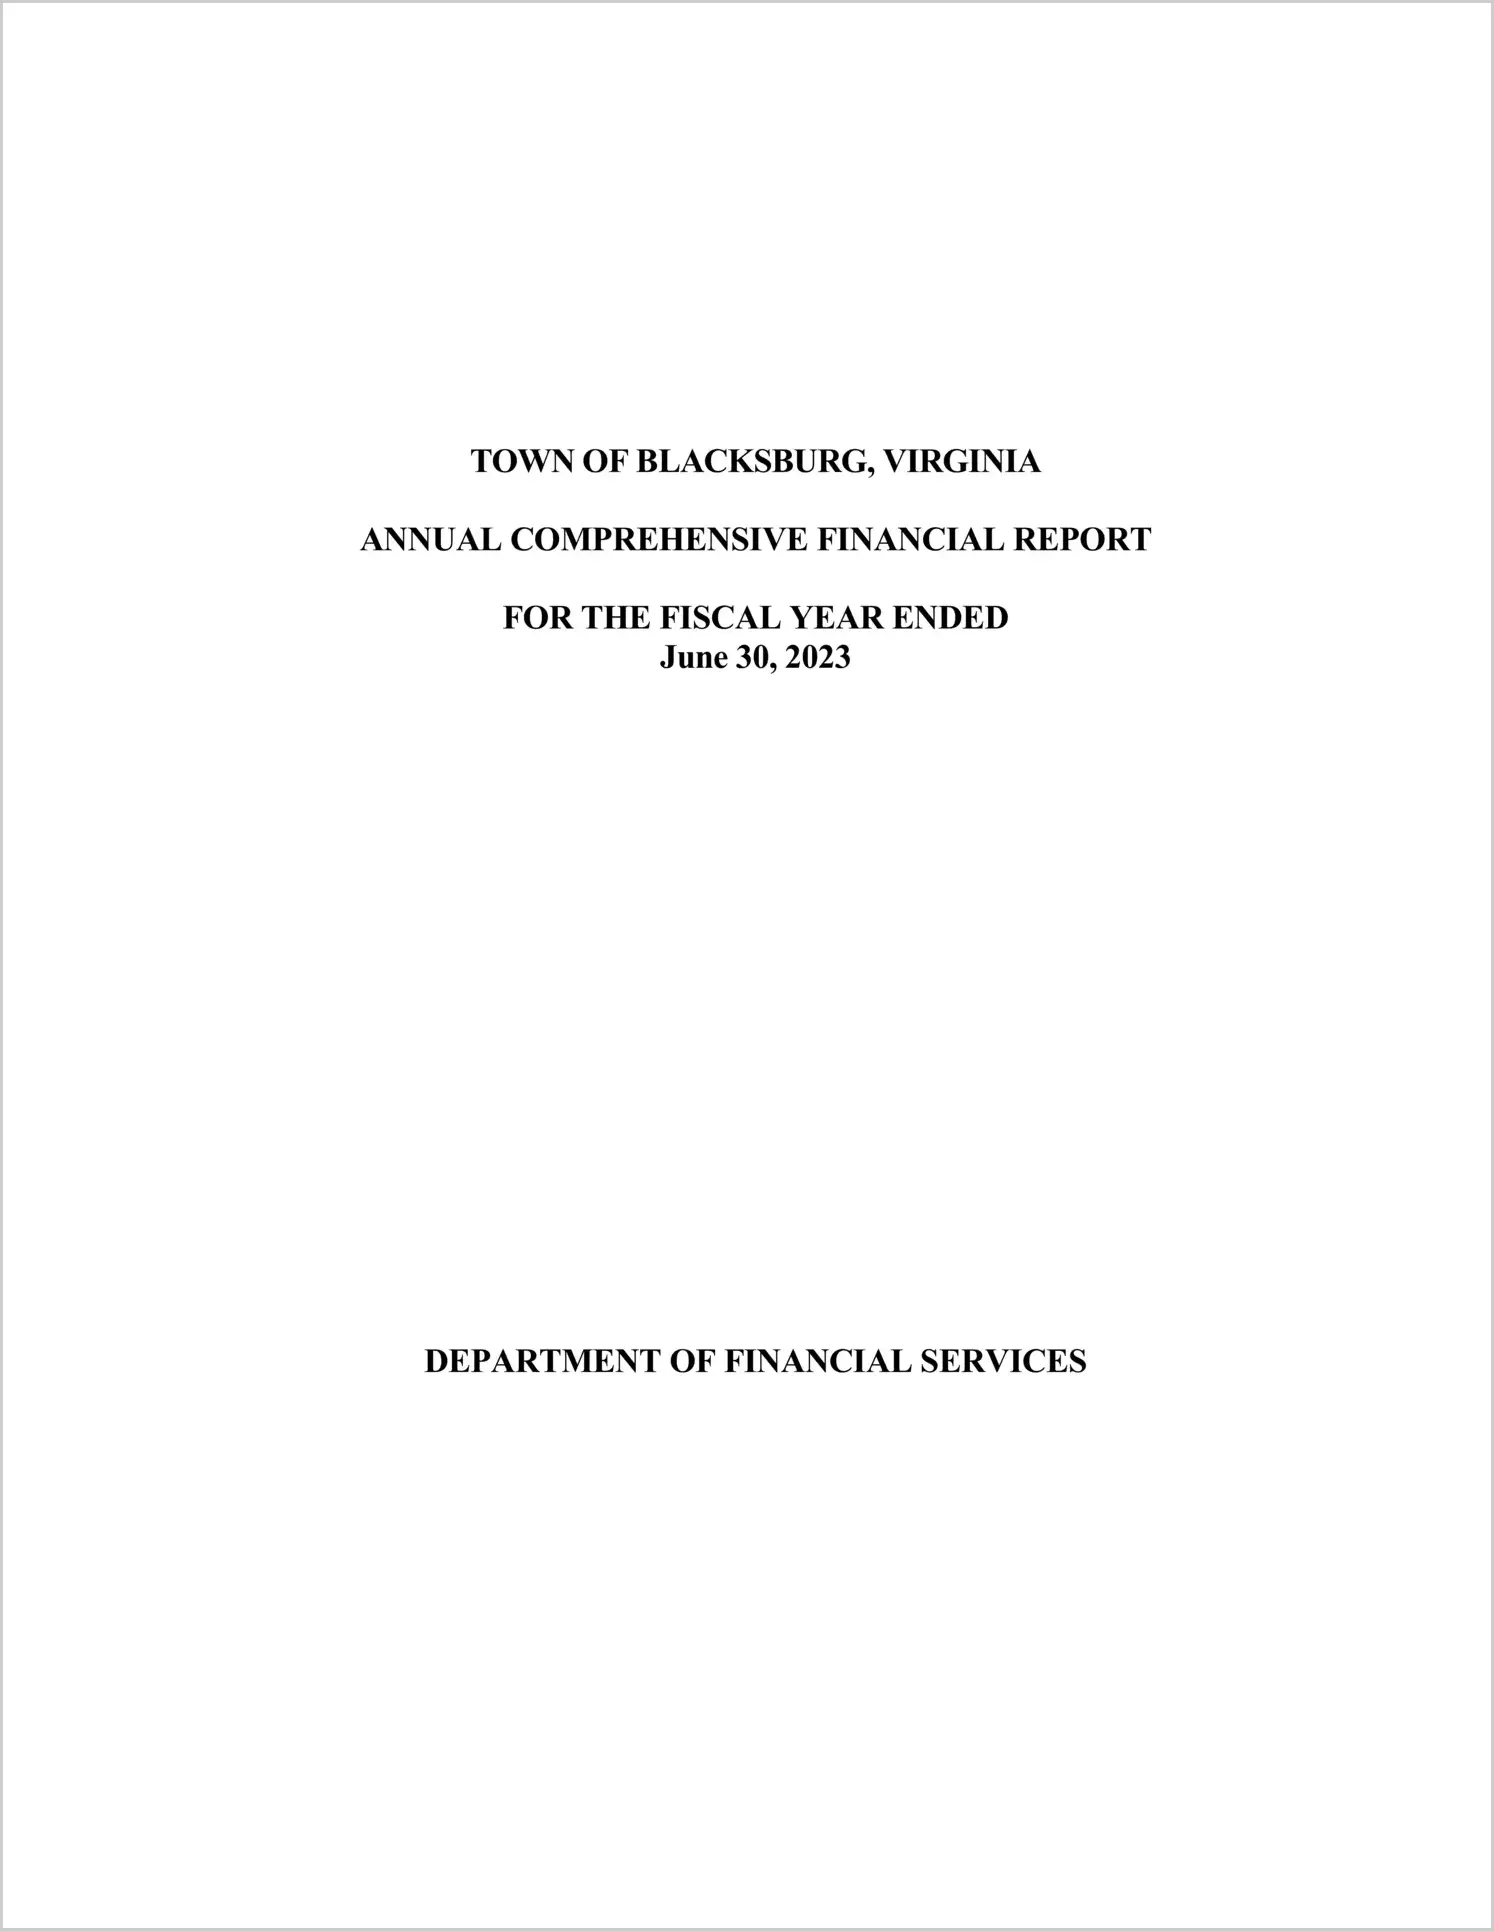 2023 Annual Financial Report for Town of Blacksburg